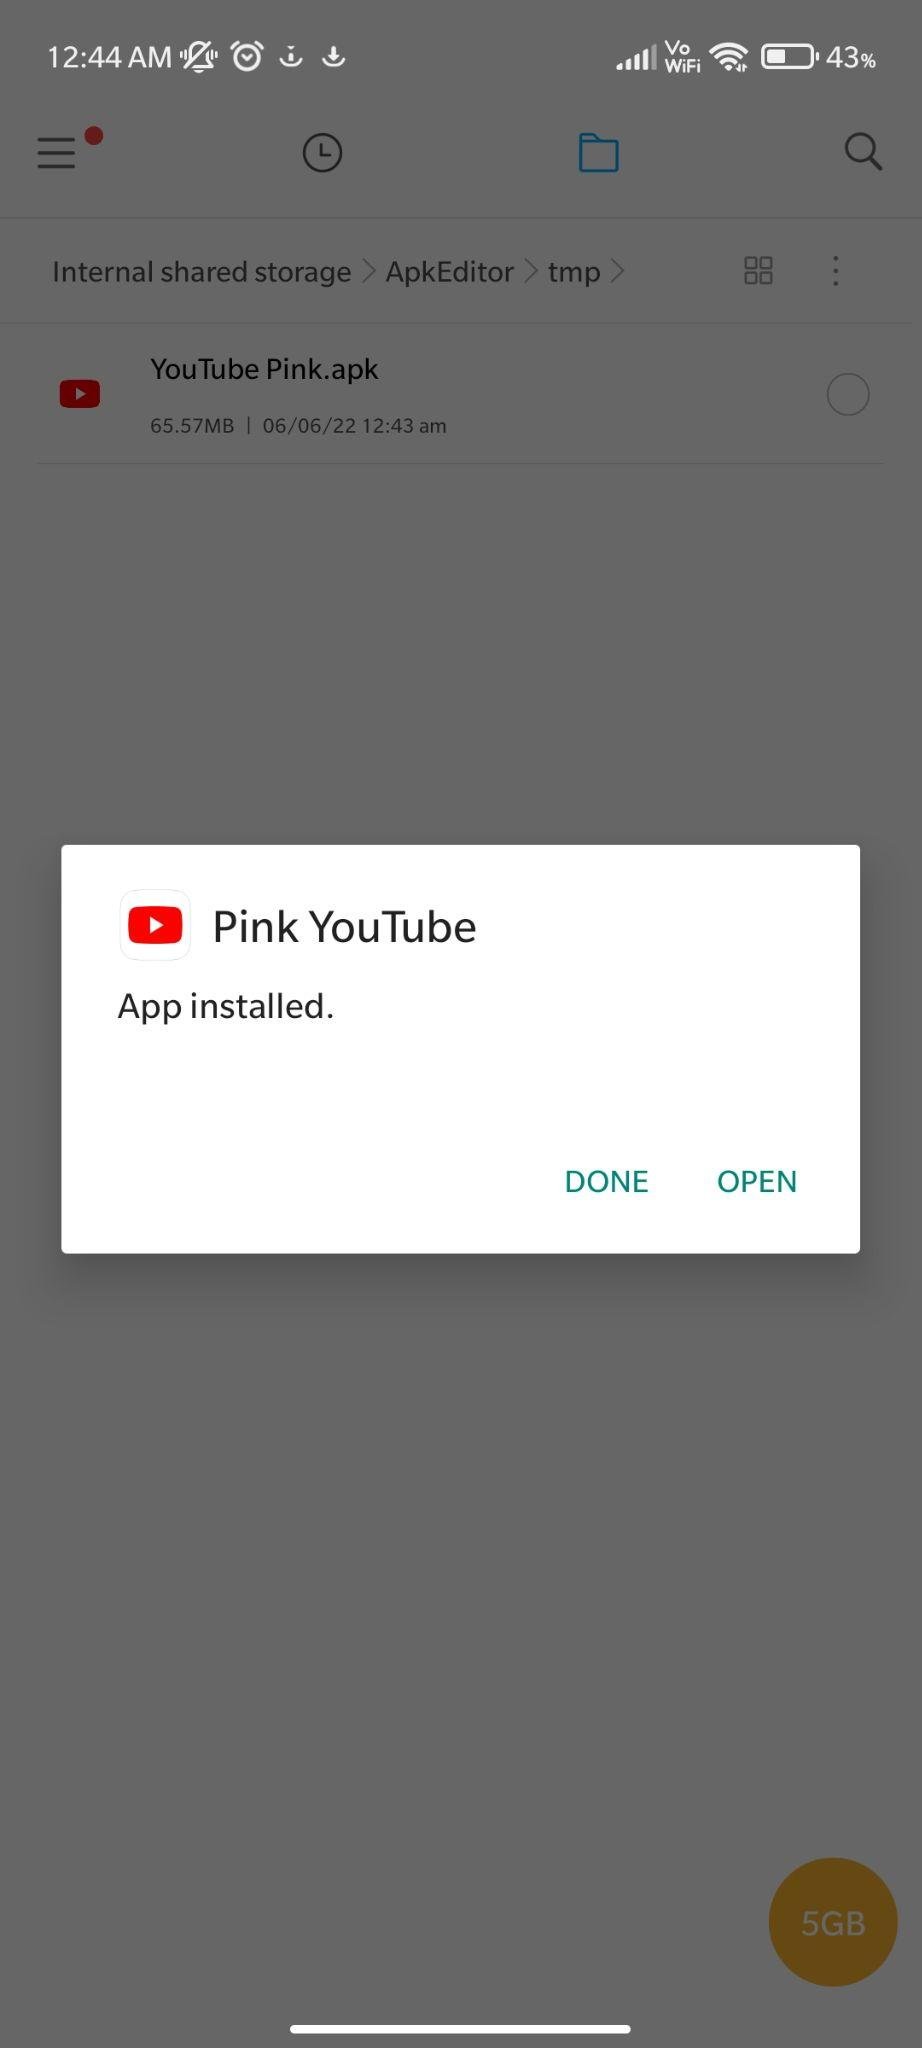 YouTube Pink apk installed